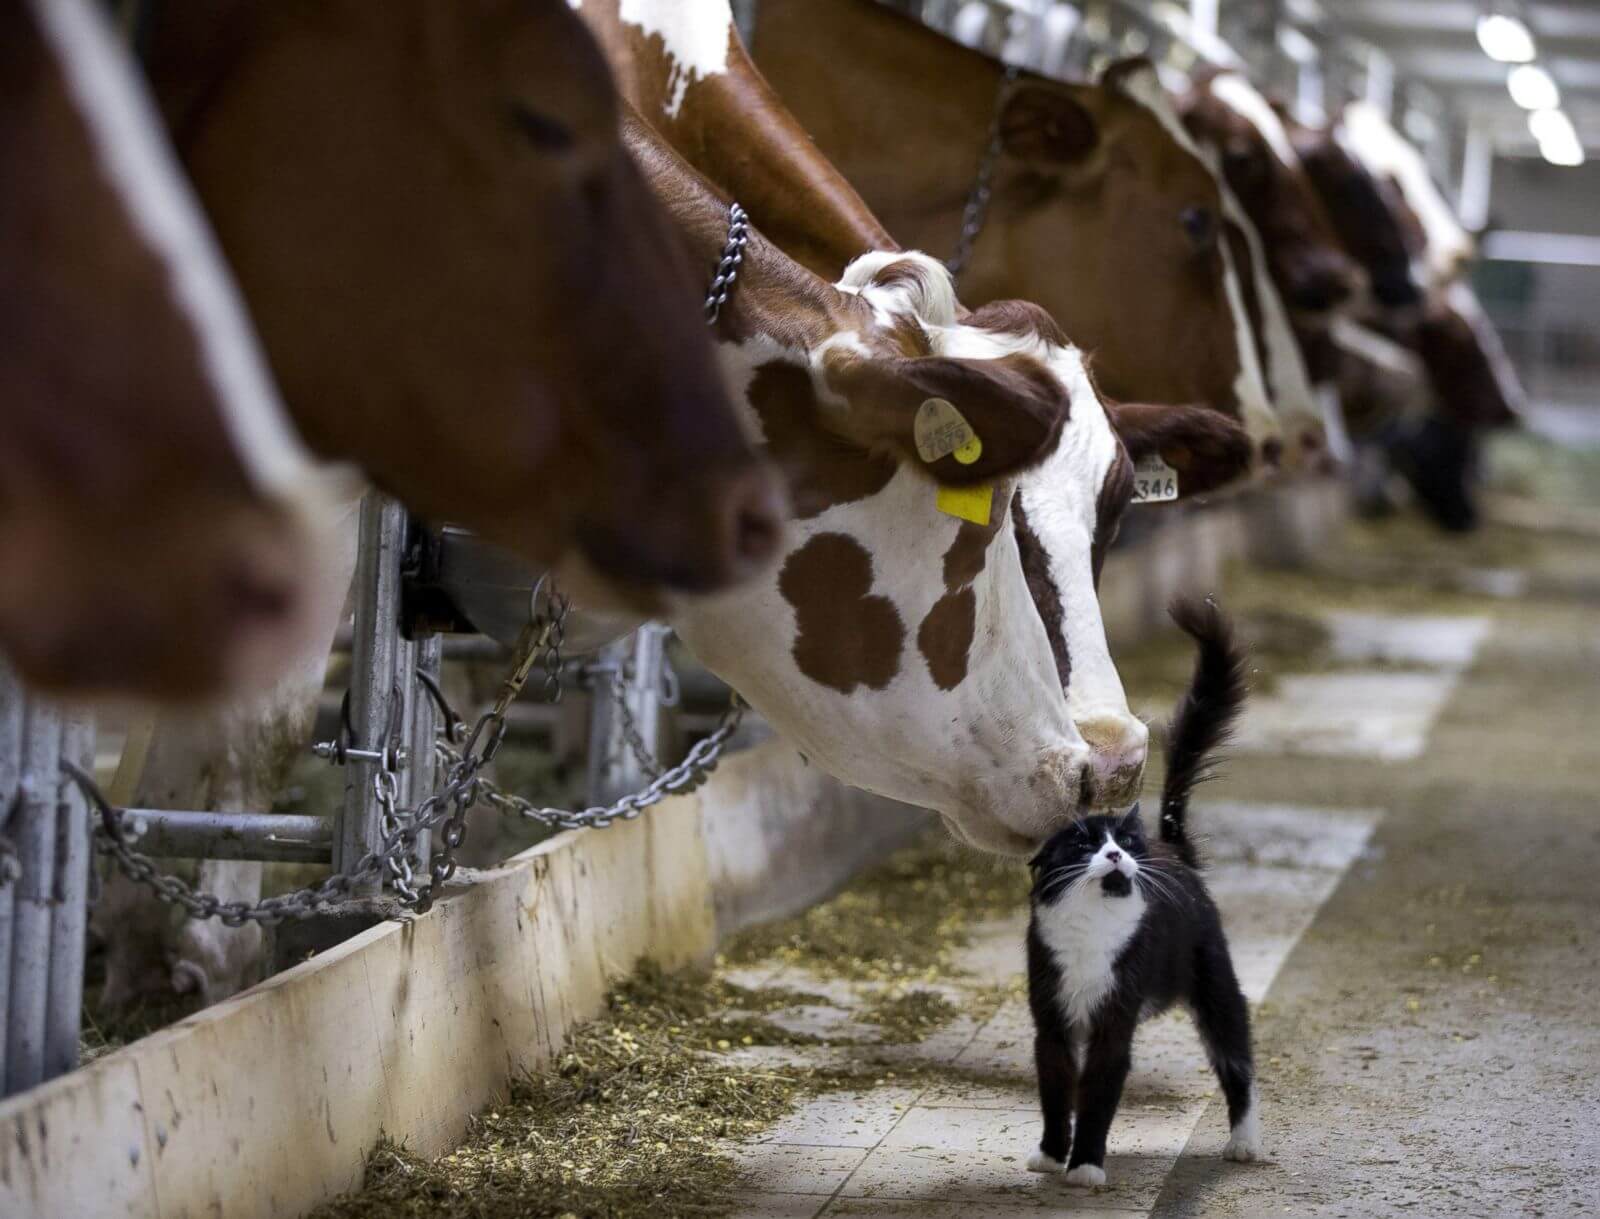 cows kitties nuzzle cat and eat the same crap